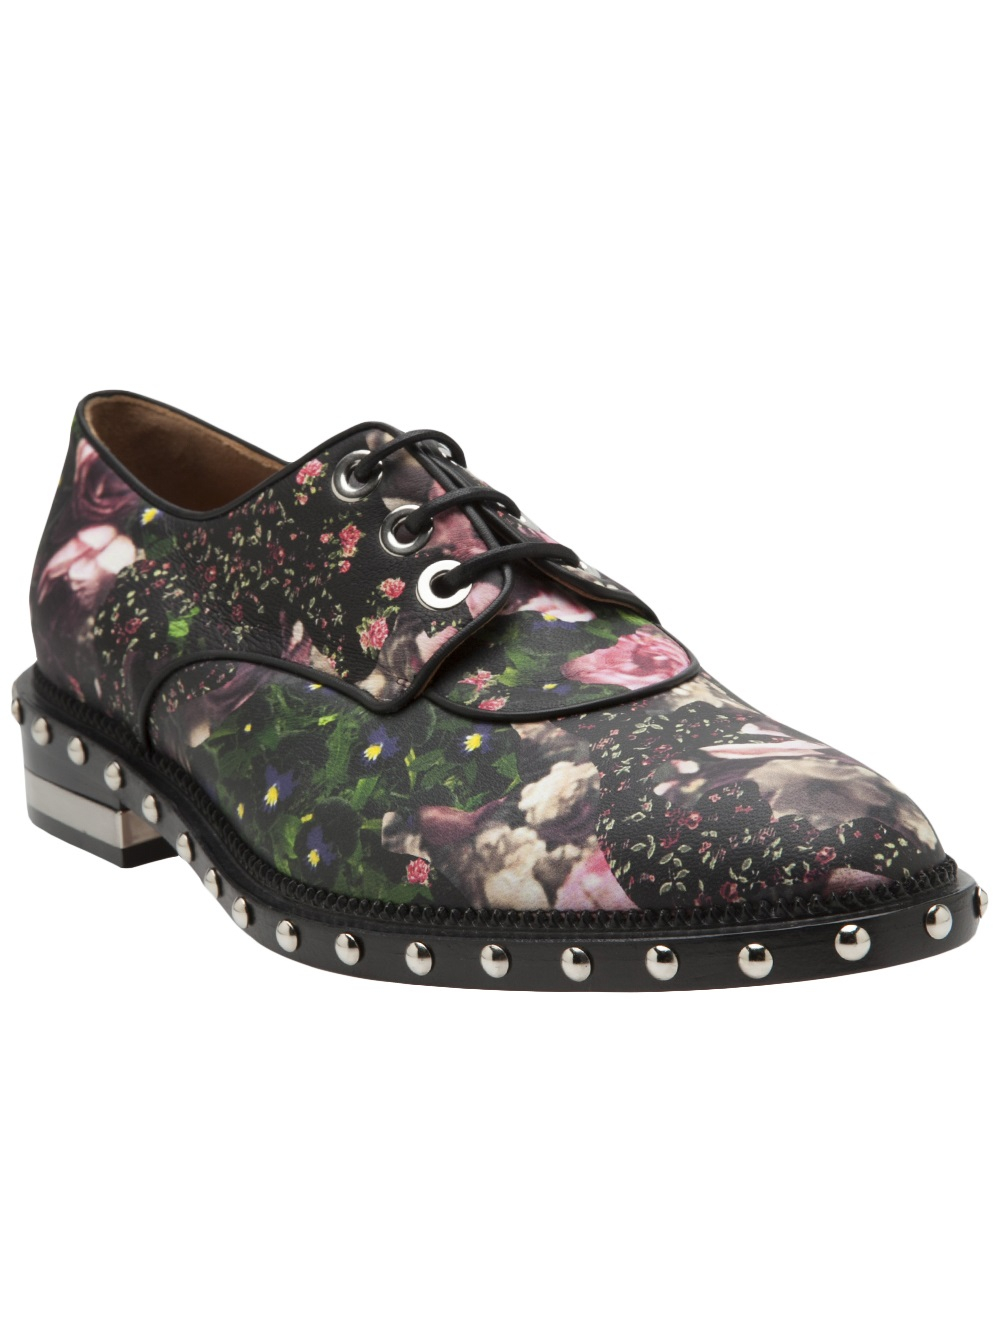 Lyst - Givenchy Floral Brogue in Black